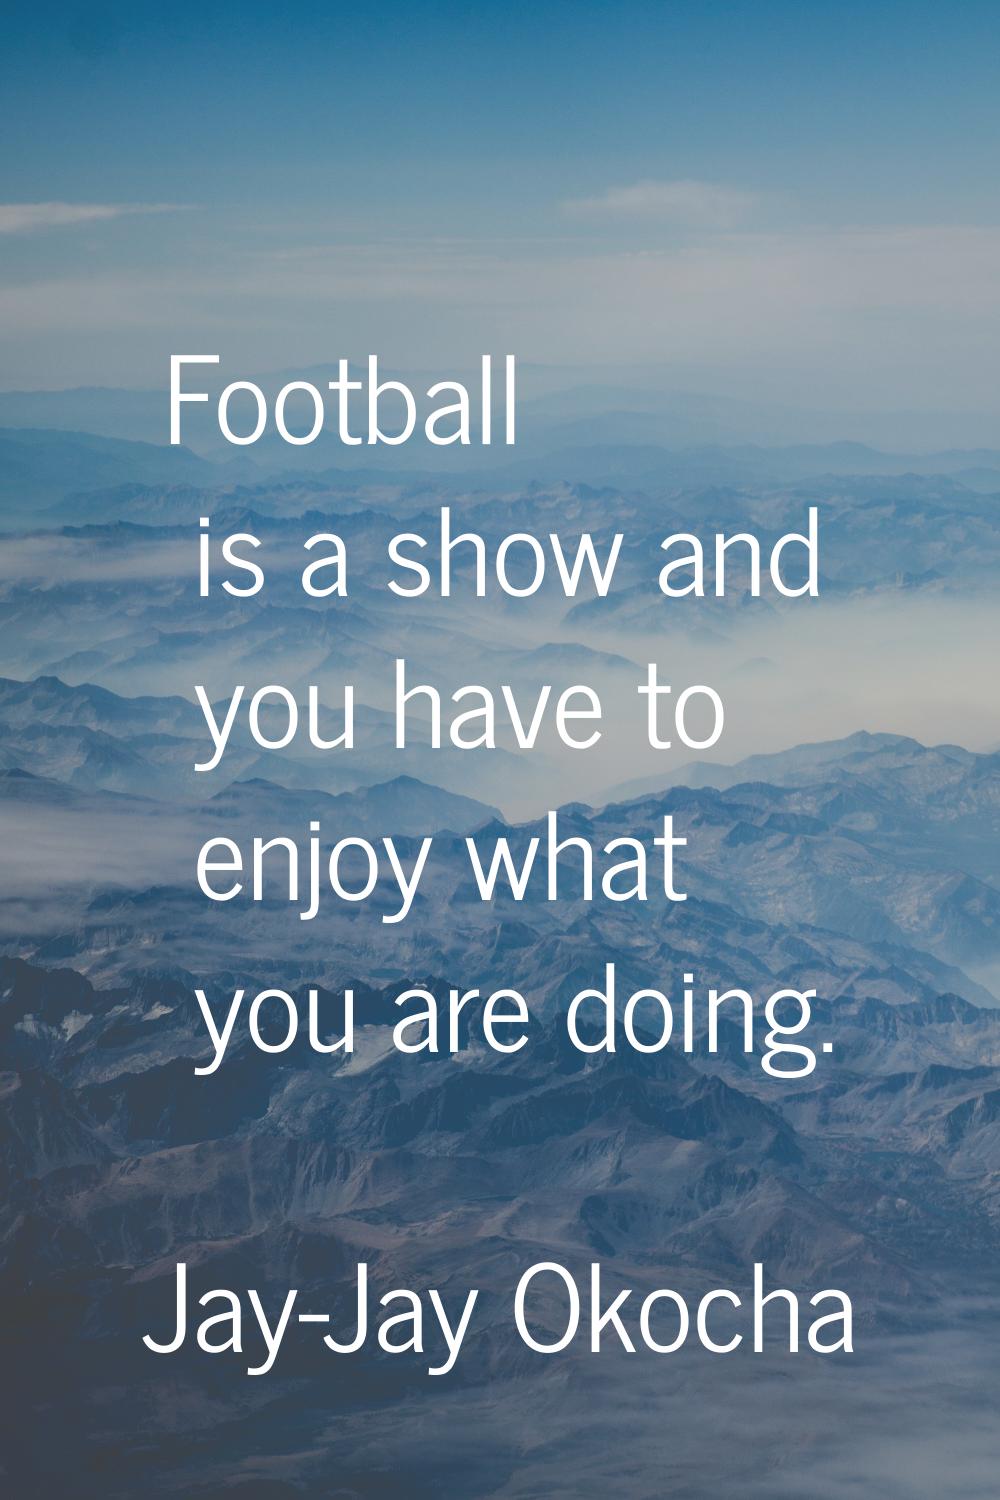 Football is a show and you have to enjoy what you are doing.